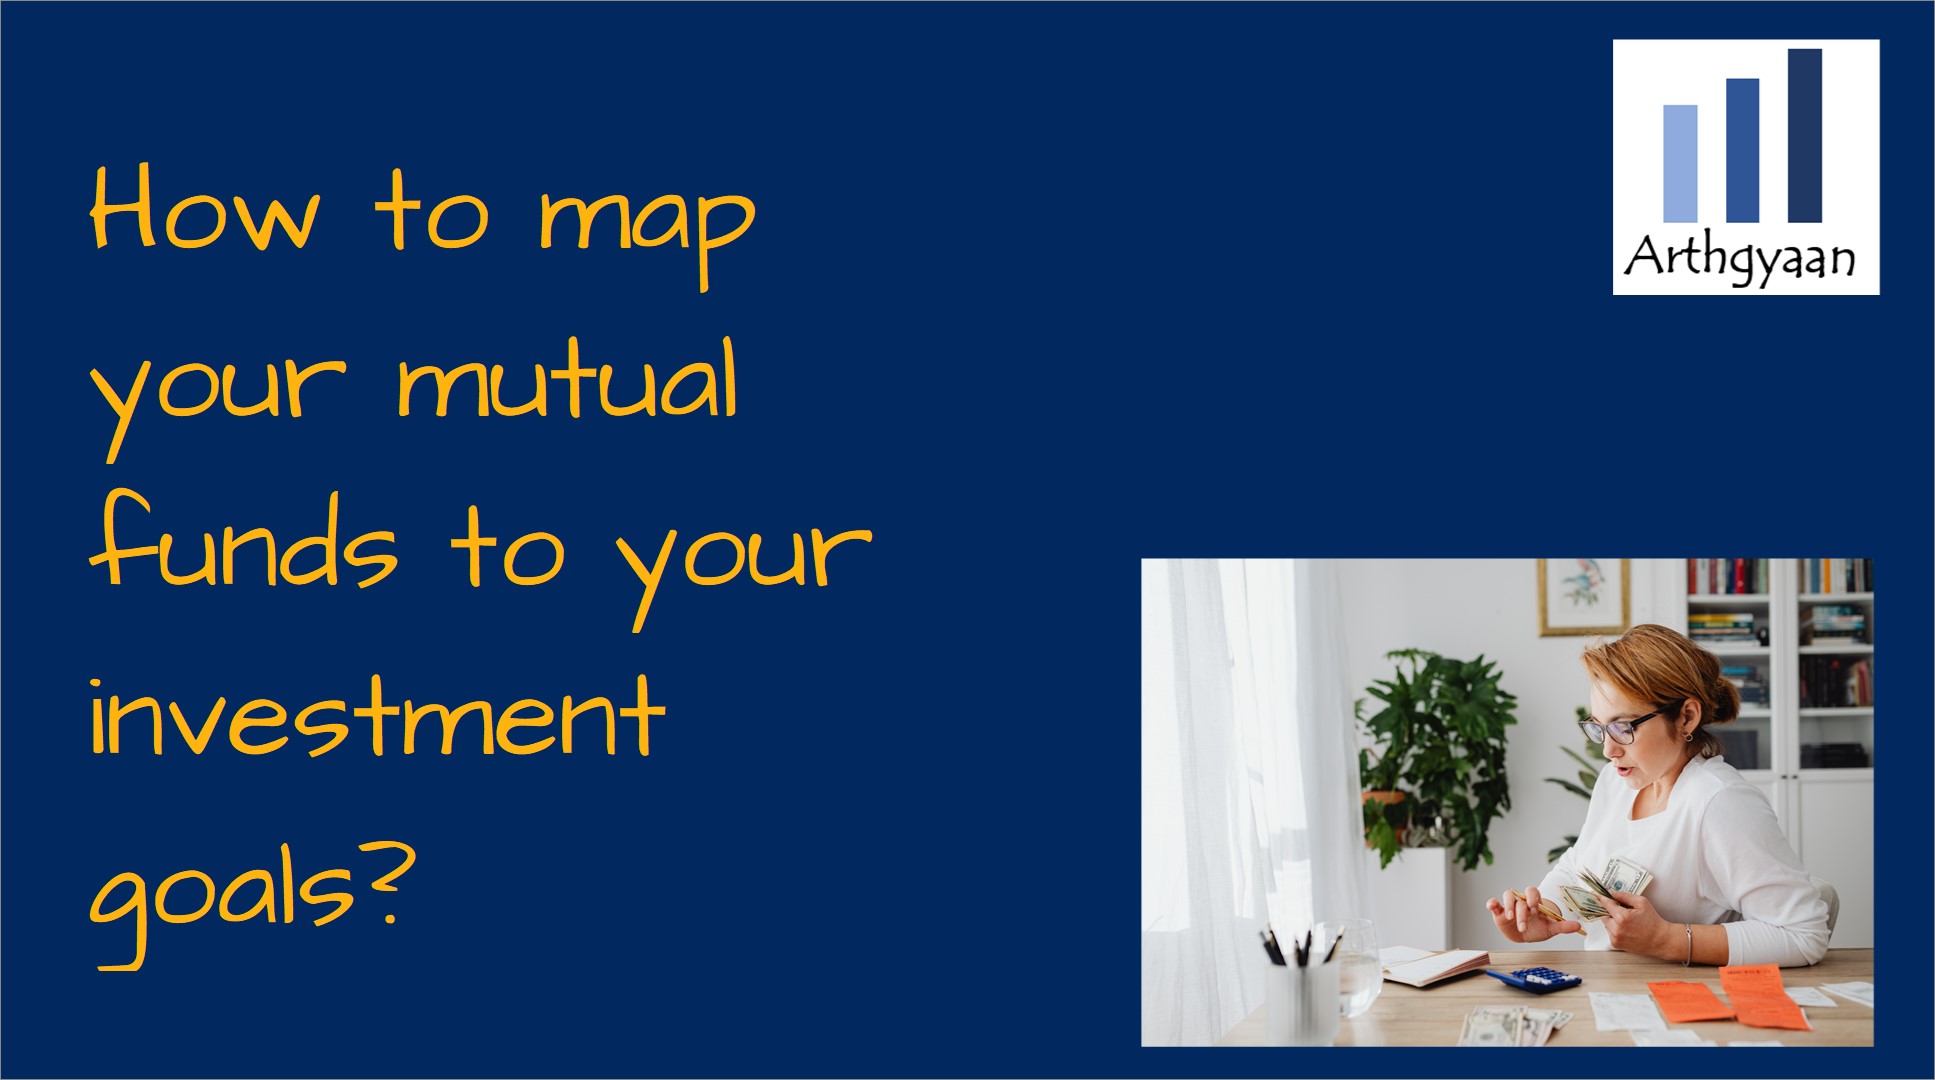 How to map your mutual funds to your investment goals?